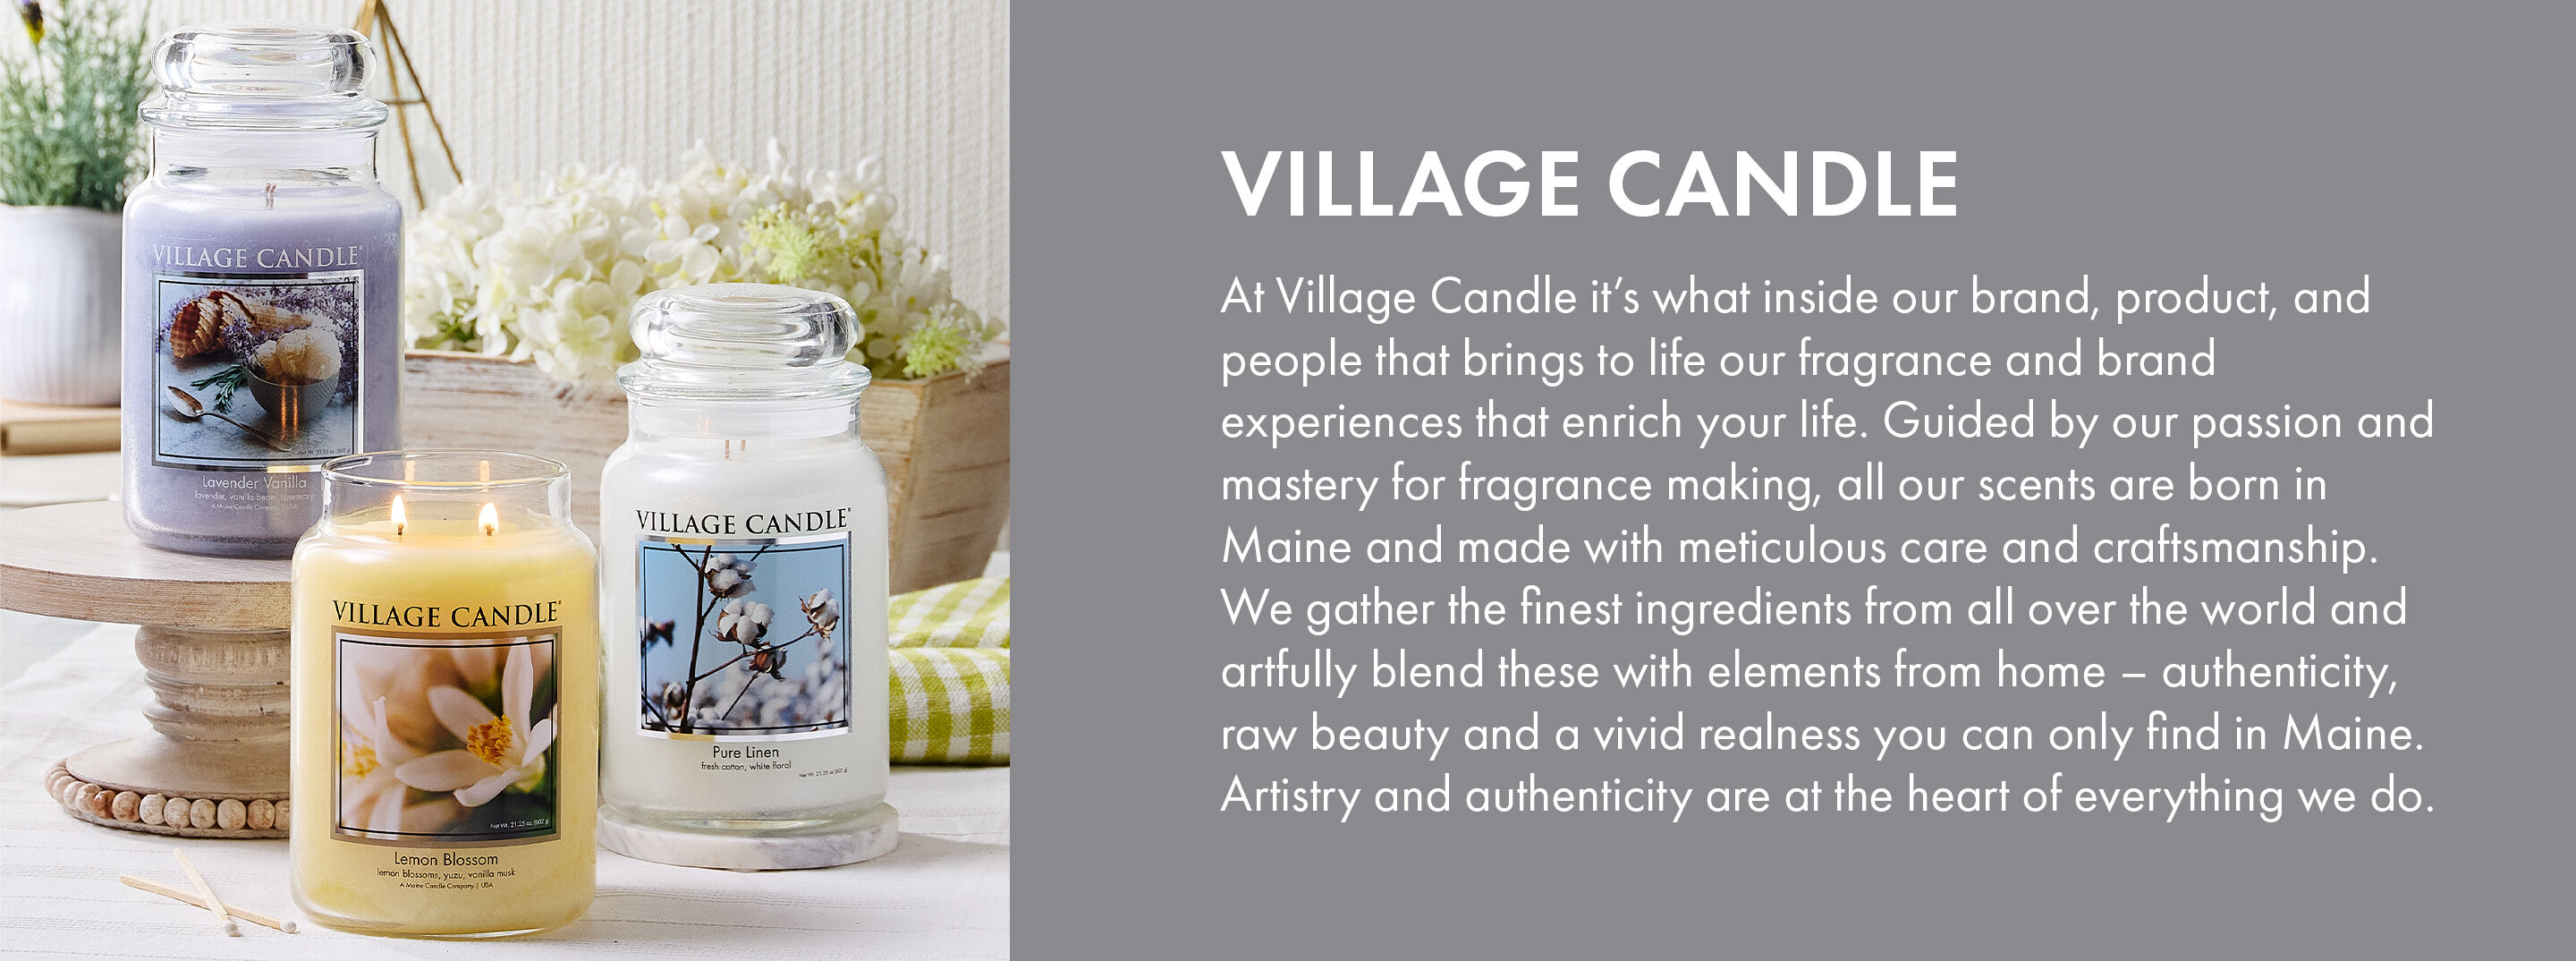 Village Candle | At Village Candle it's what inside our brand, product, and people that brings to life our fragrance and brand experiences that enrich your life. Guided by our passion and mastery for fragrance making, all our scents are born in Maine and made with meticulous care and craftsmanship. We gather the finest ingredients from all over the world and artfully blend these with elements from home - authenticity, raw beauty and a vivid realness you can only find in Maine. Artistry and authenticity are at the heart of everything we do.